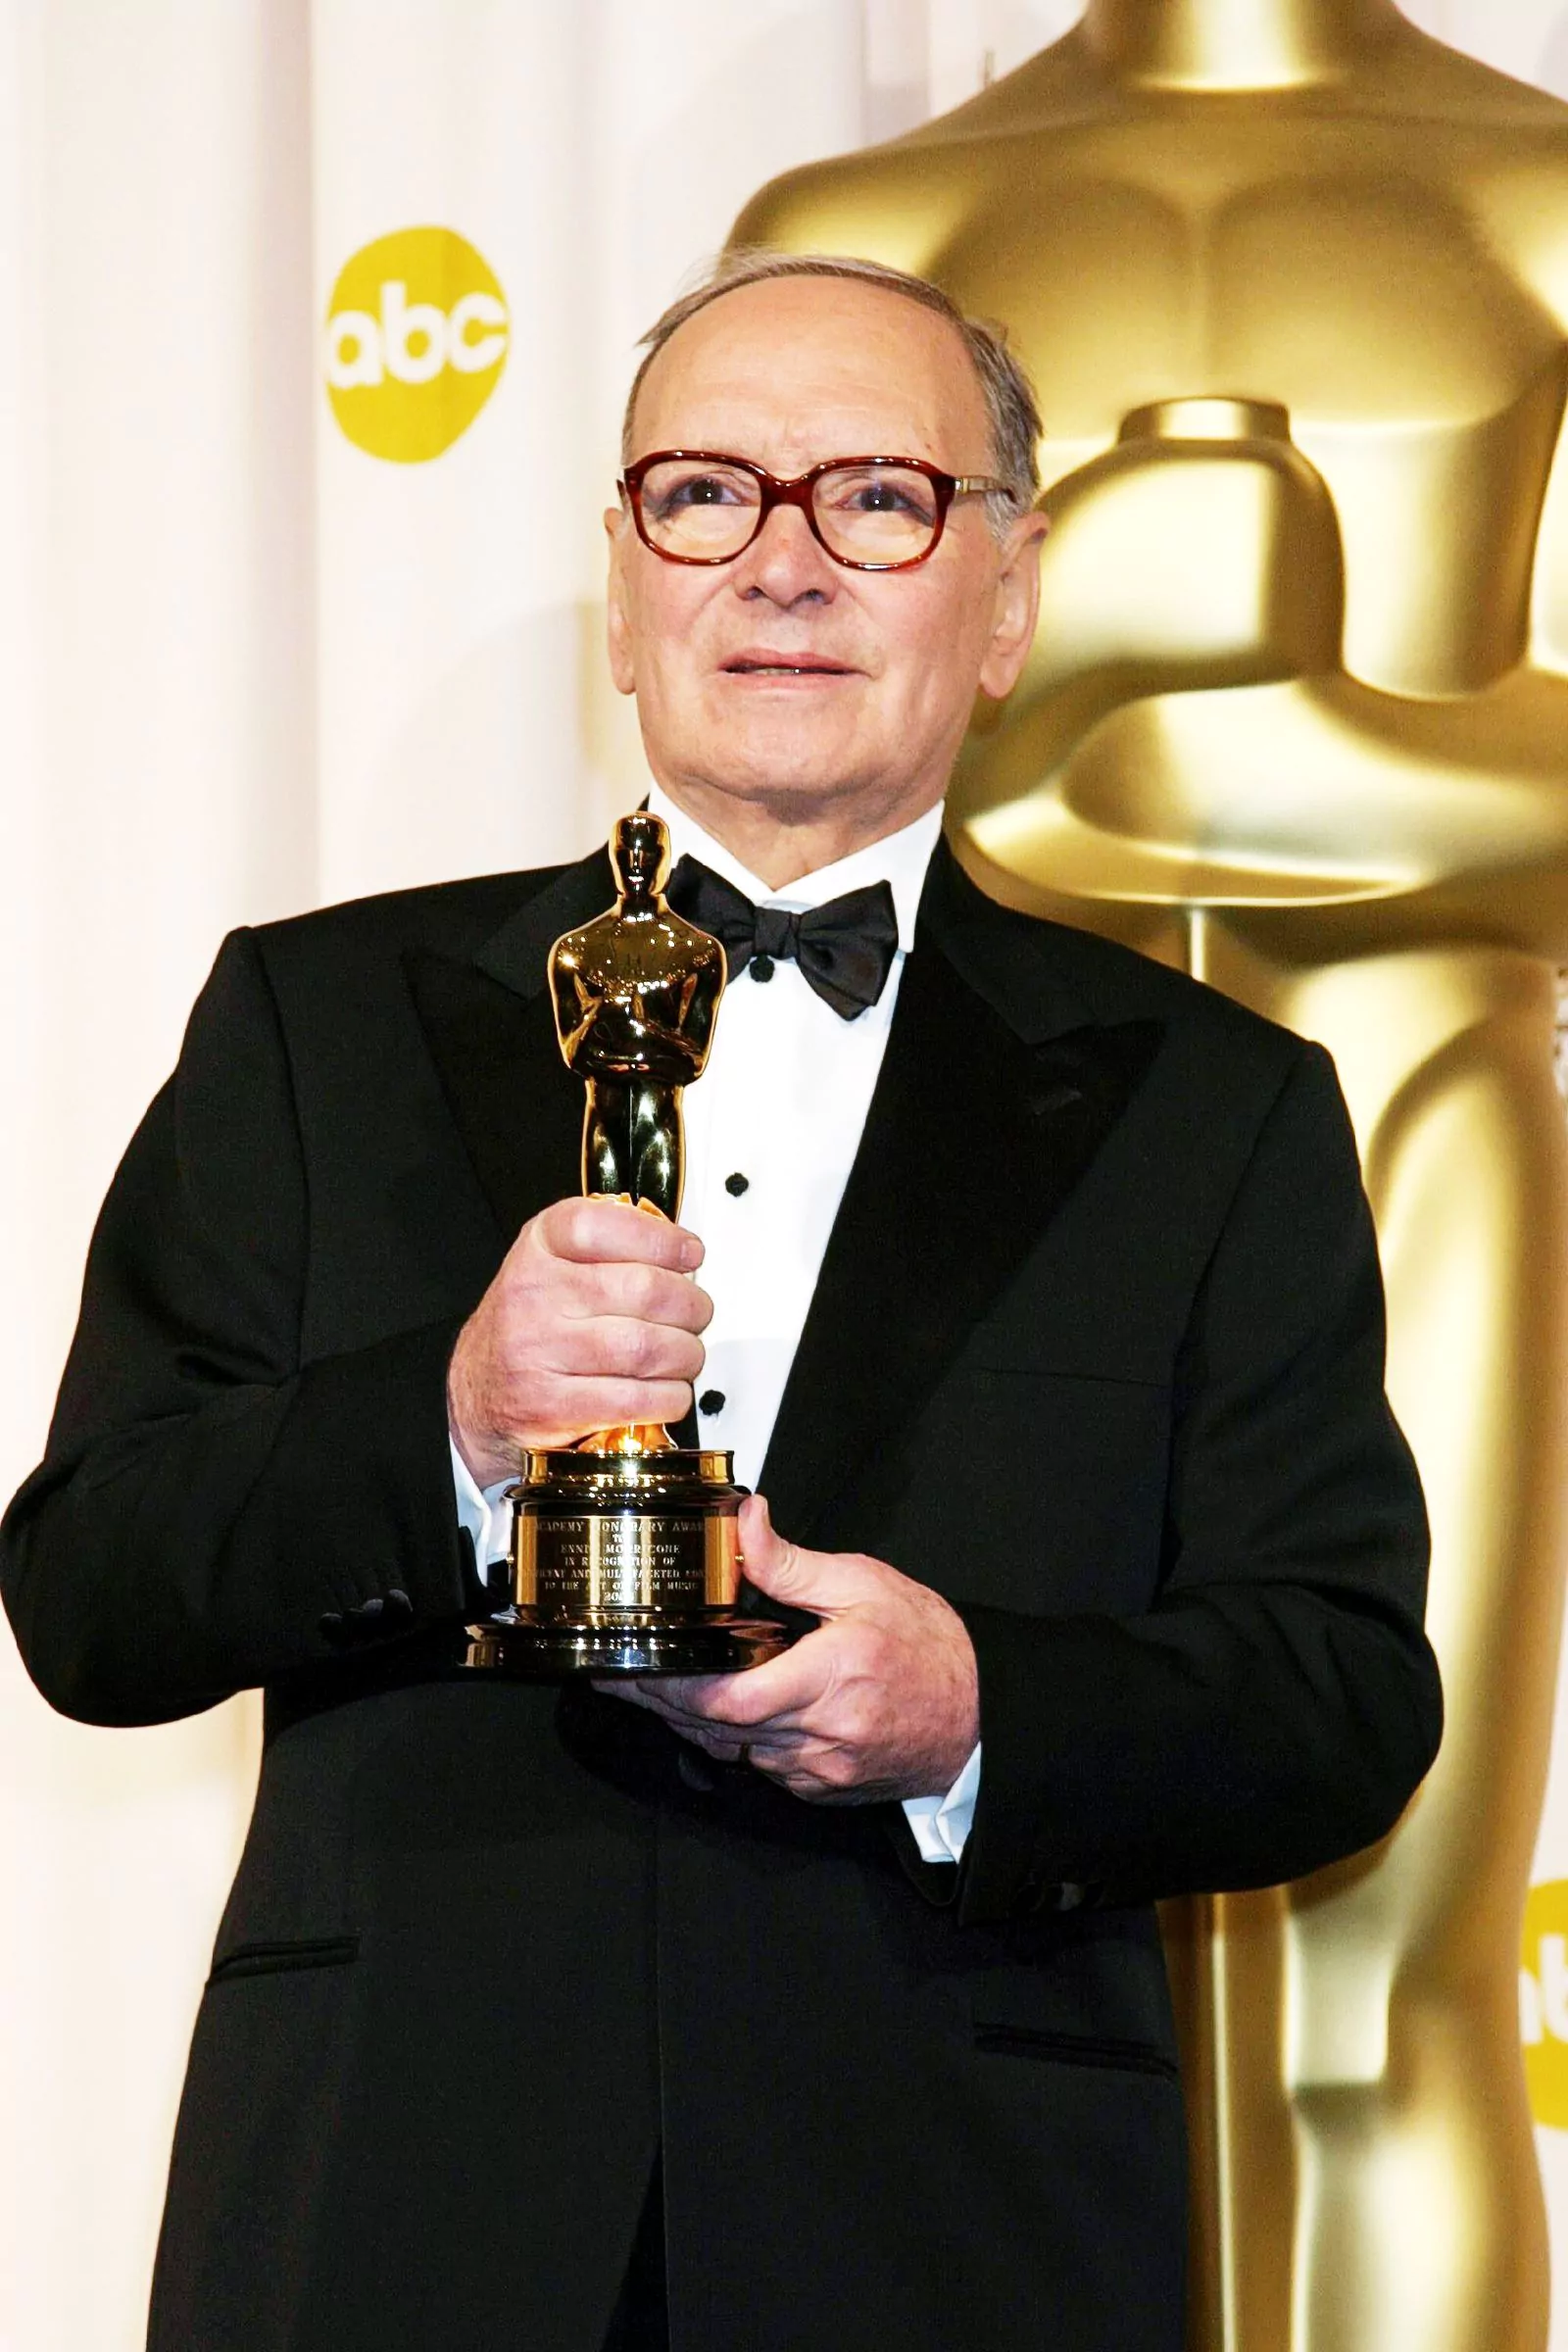 Ennio Morricone at the 79th Annual Academy Awards, February 25, 2007